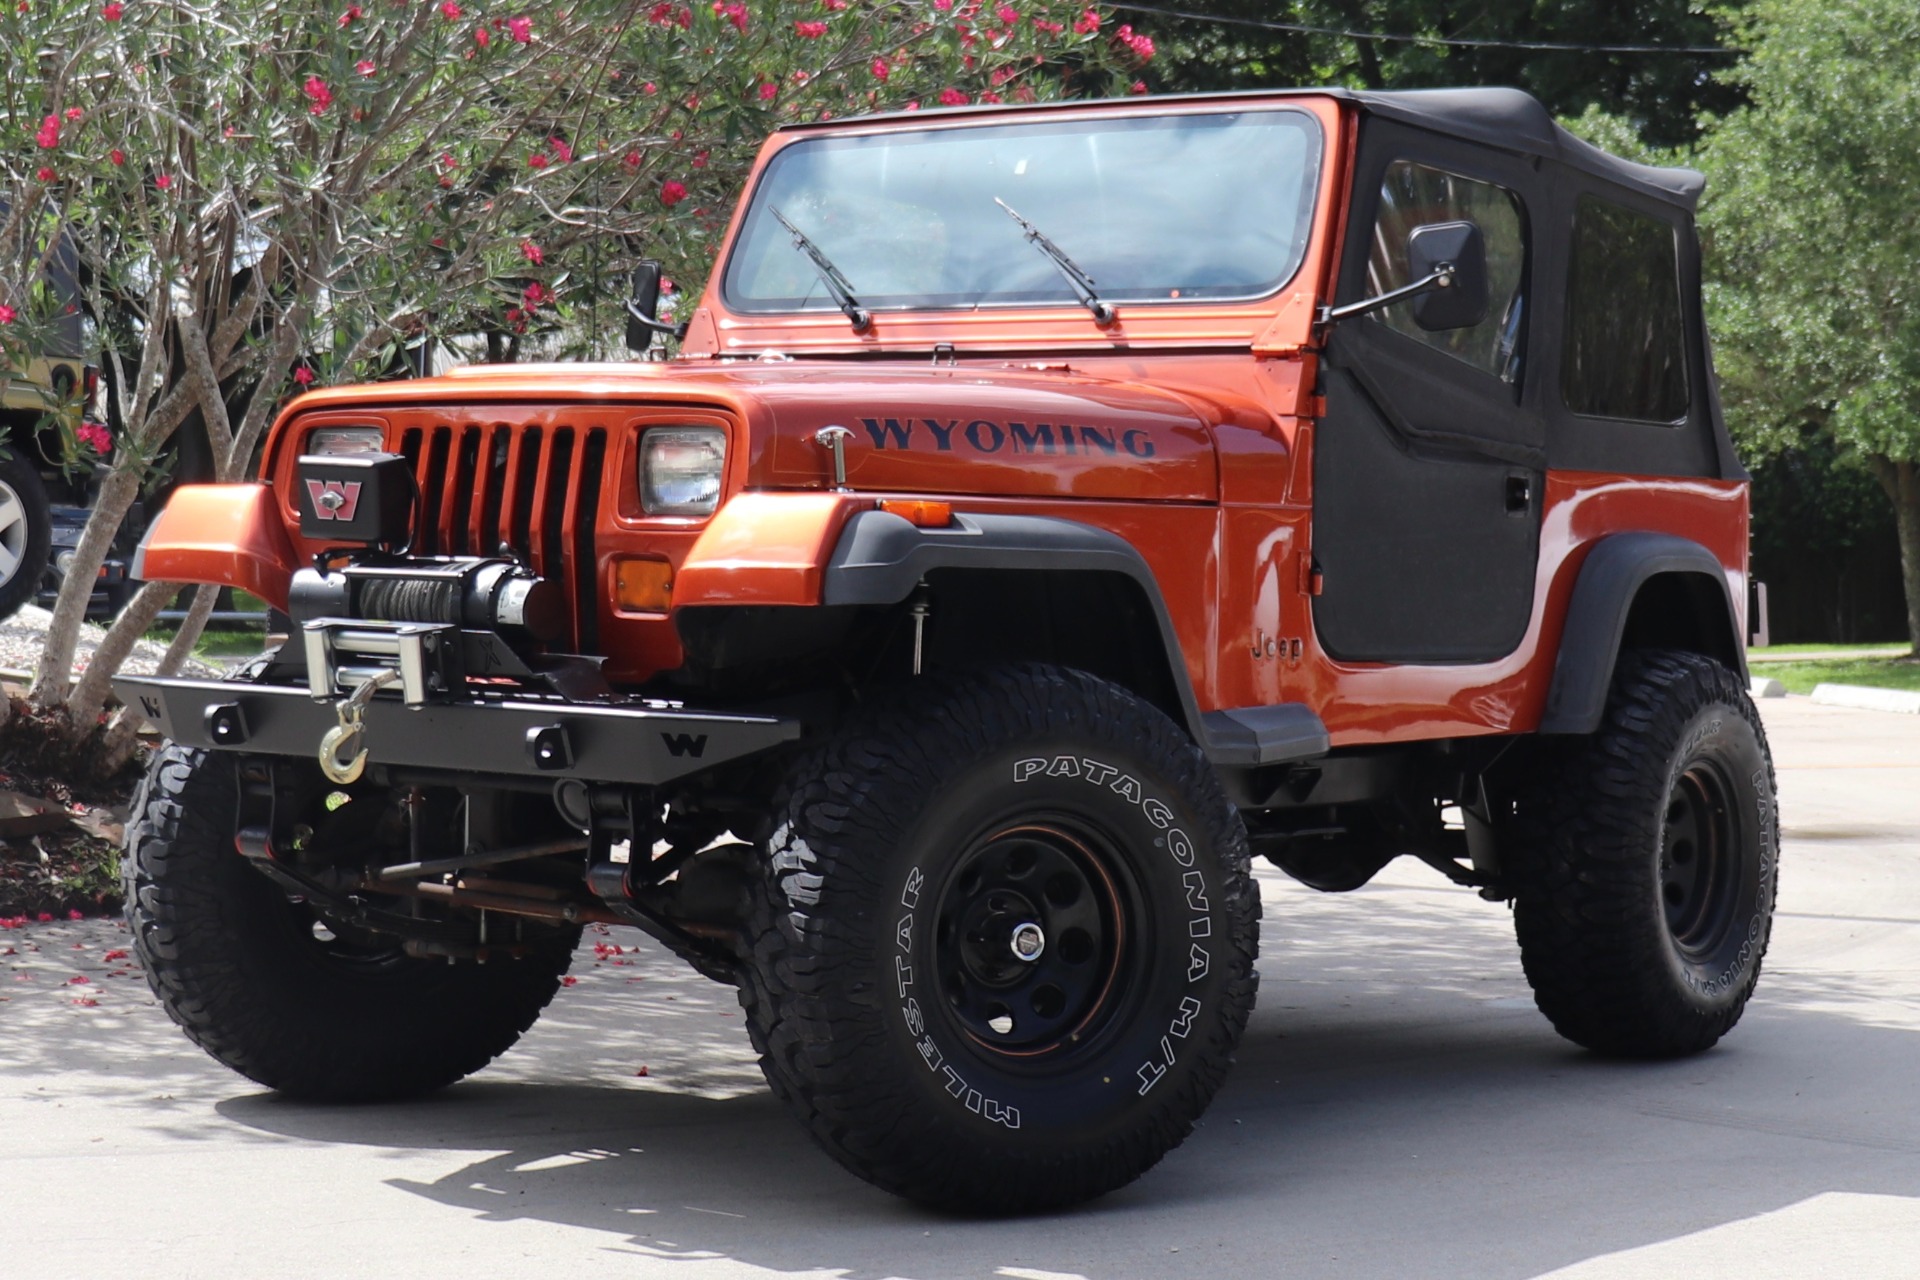 Used 1992 Jeep Wrangler For Sale ($11,995) | Select Jeeps Inc. Stock #547813